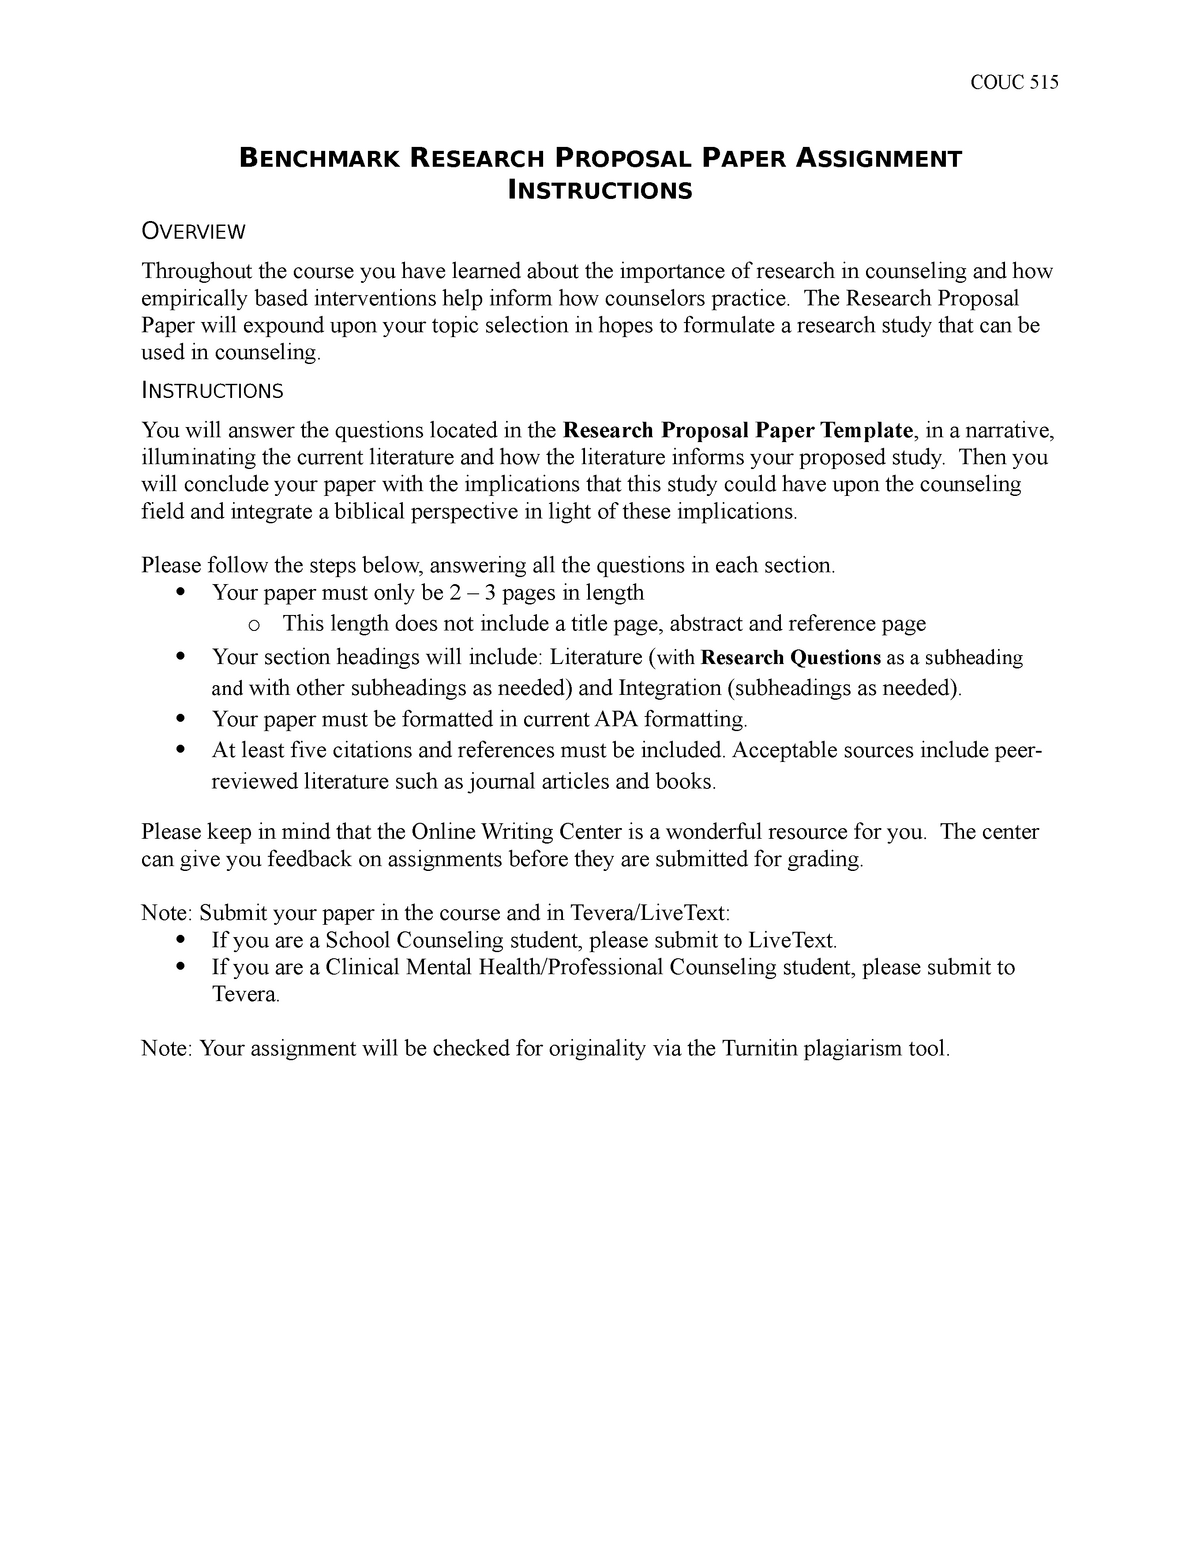 couc 515 research proposal paper